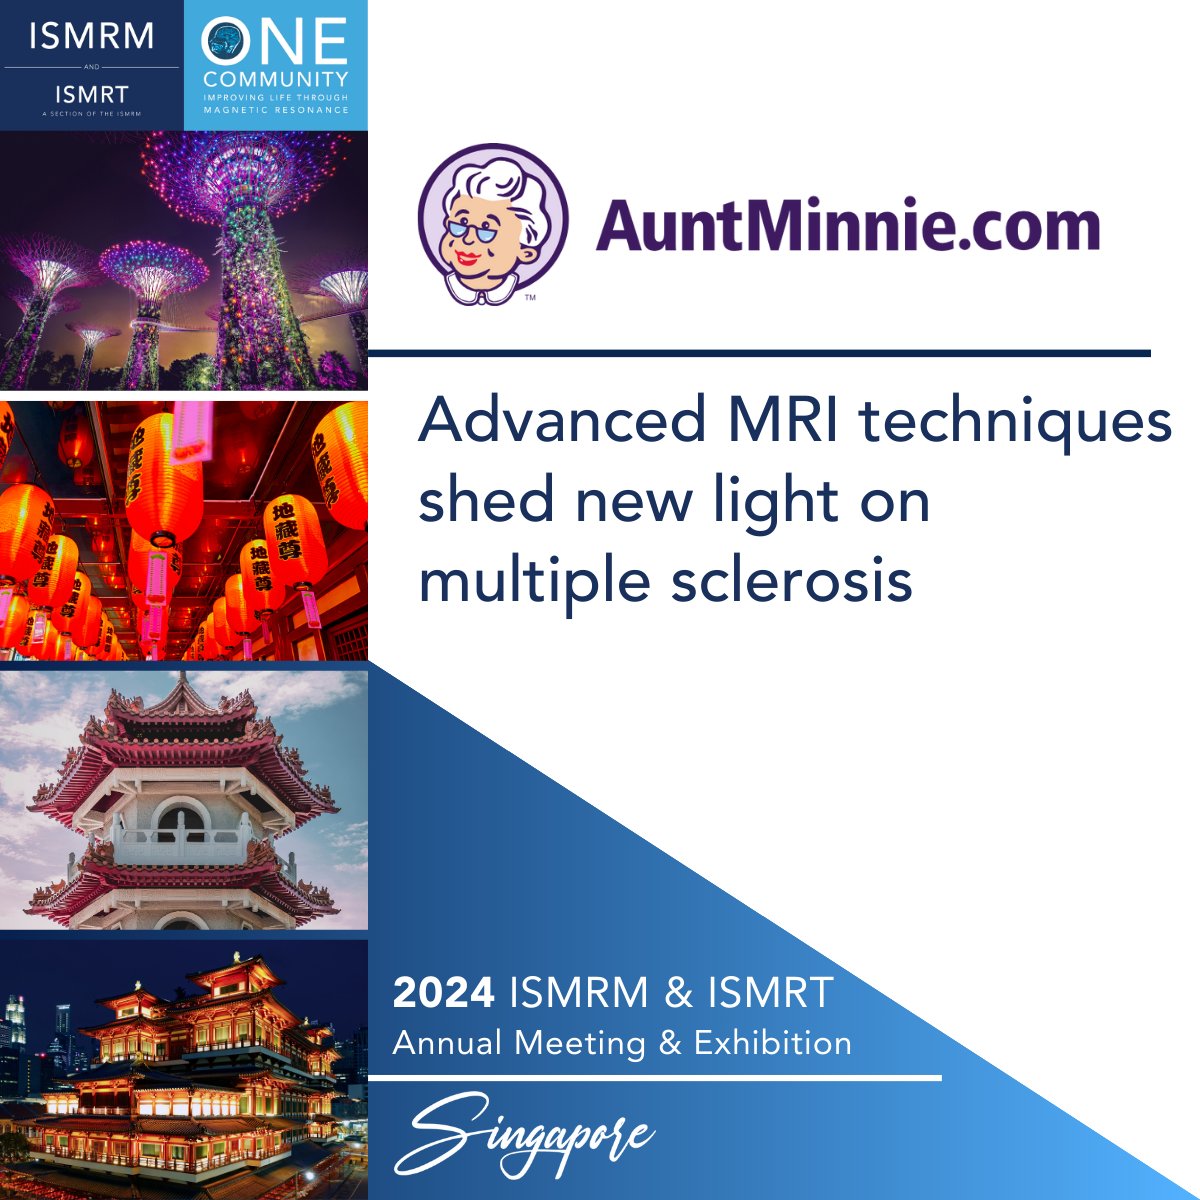 Did you miss the Annual Meeting in Singapore? Aunt Minnie has you covered. Check out this article about MRI & multiple sclerosis: ow.ly/eE9X50RYPqJ #ISMRM2024 #ISMRT2024 #ISMRM #ISMRT #MRI #MagneticResonance #MR #MedicalImaging